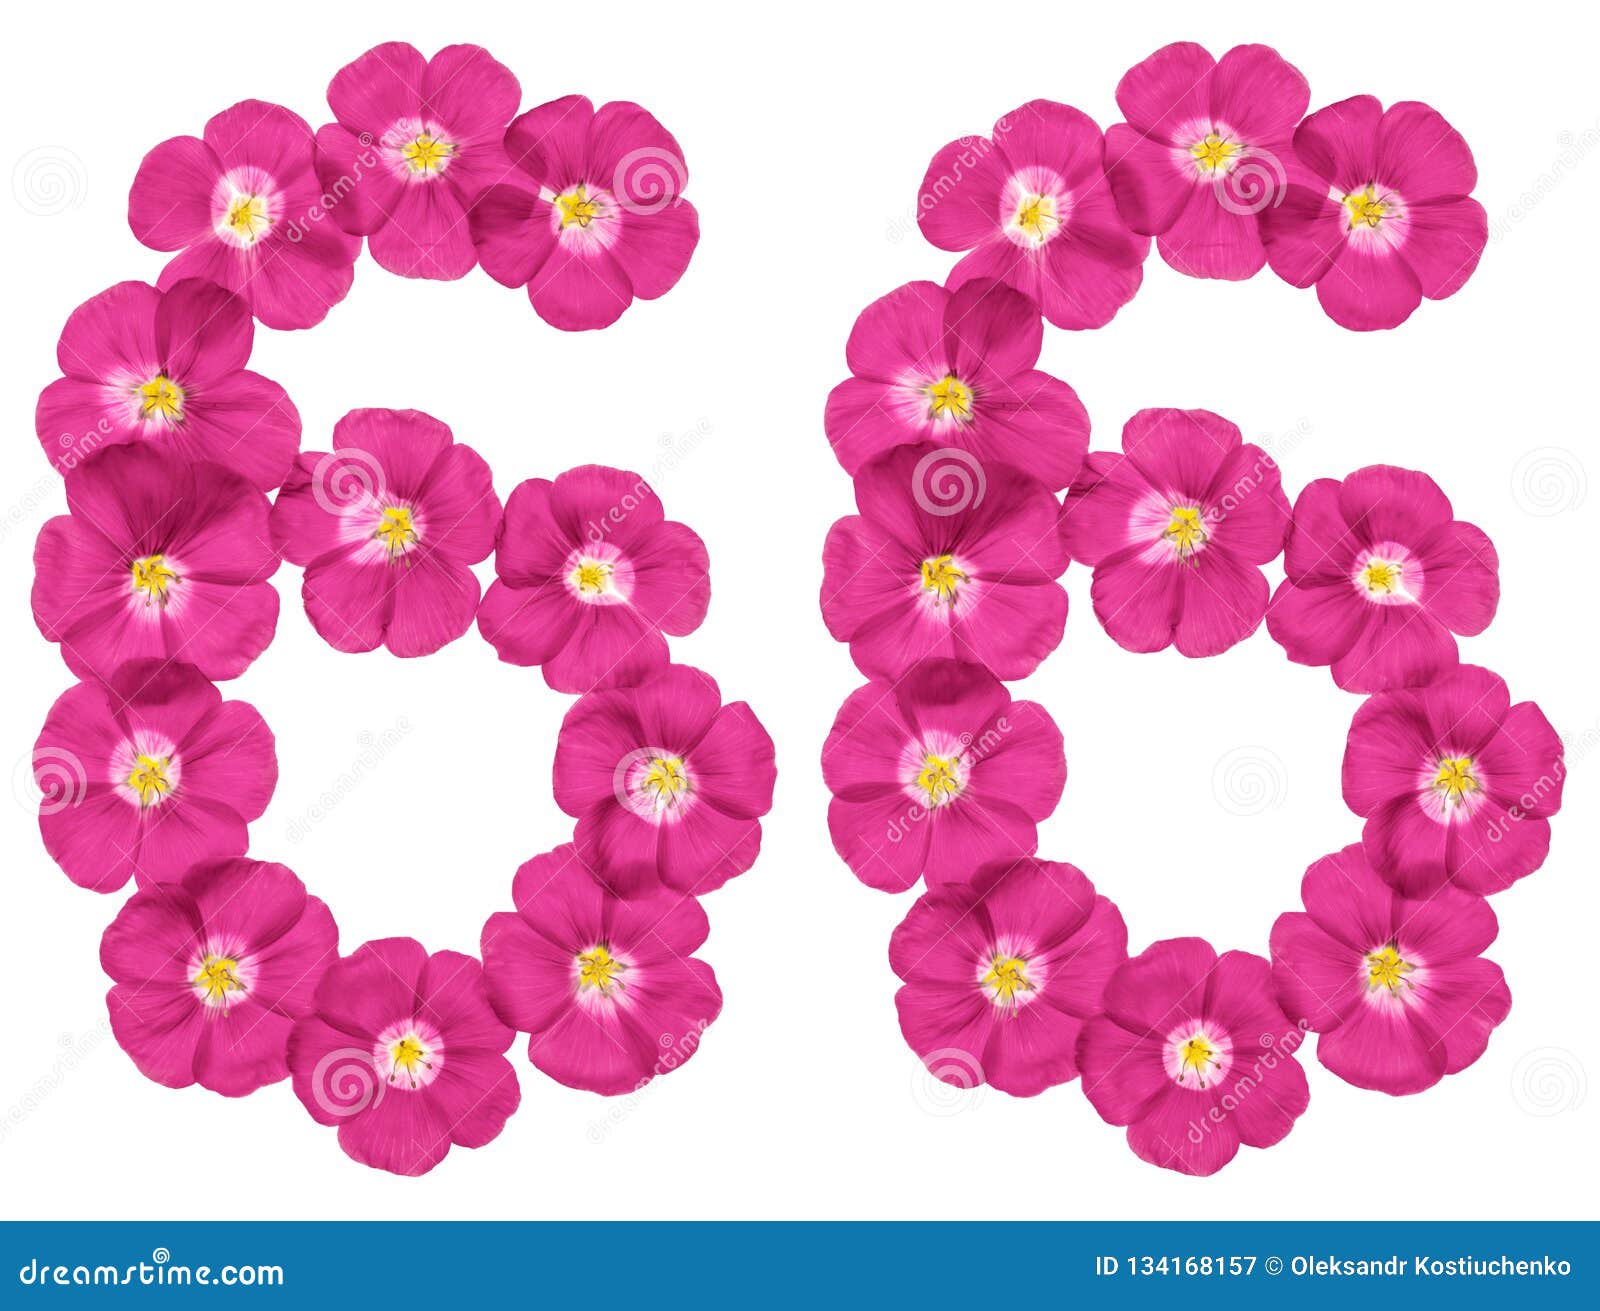 Boum 1 Mars 2023. - Page 2 Arabic-numeral-sixty-six-pink-flowers-flax-isolated-white-background-134168157